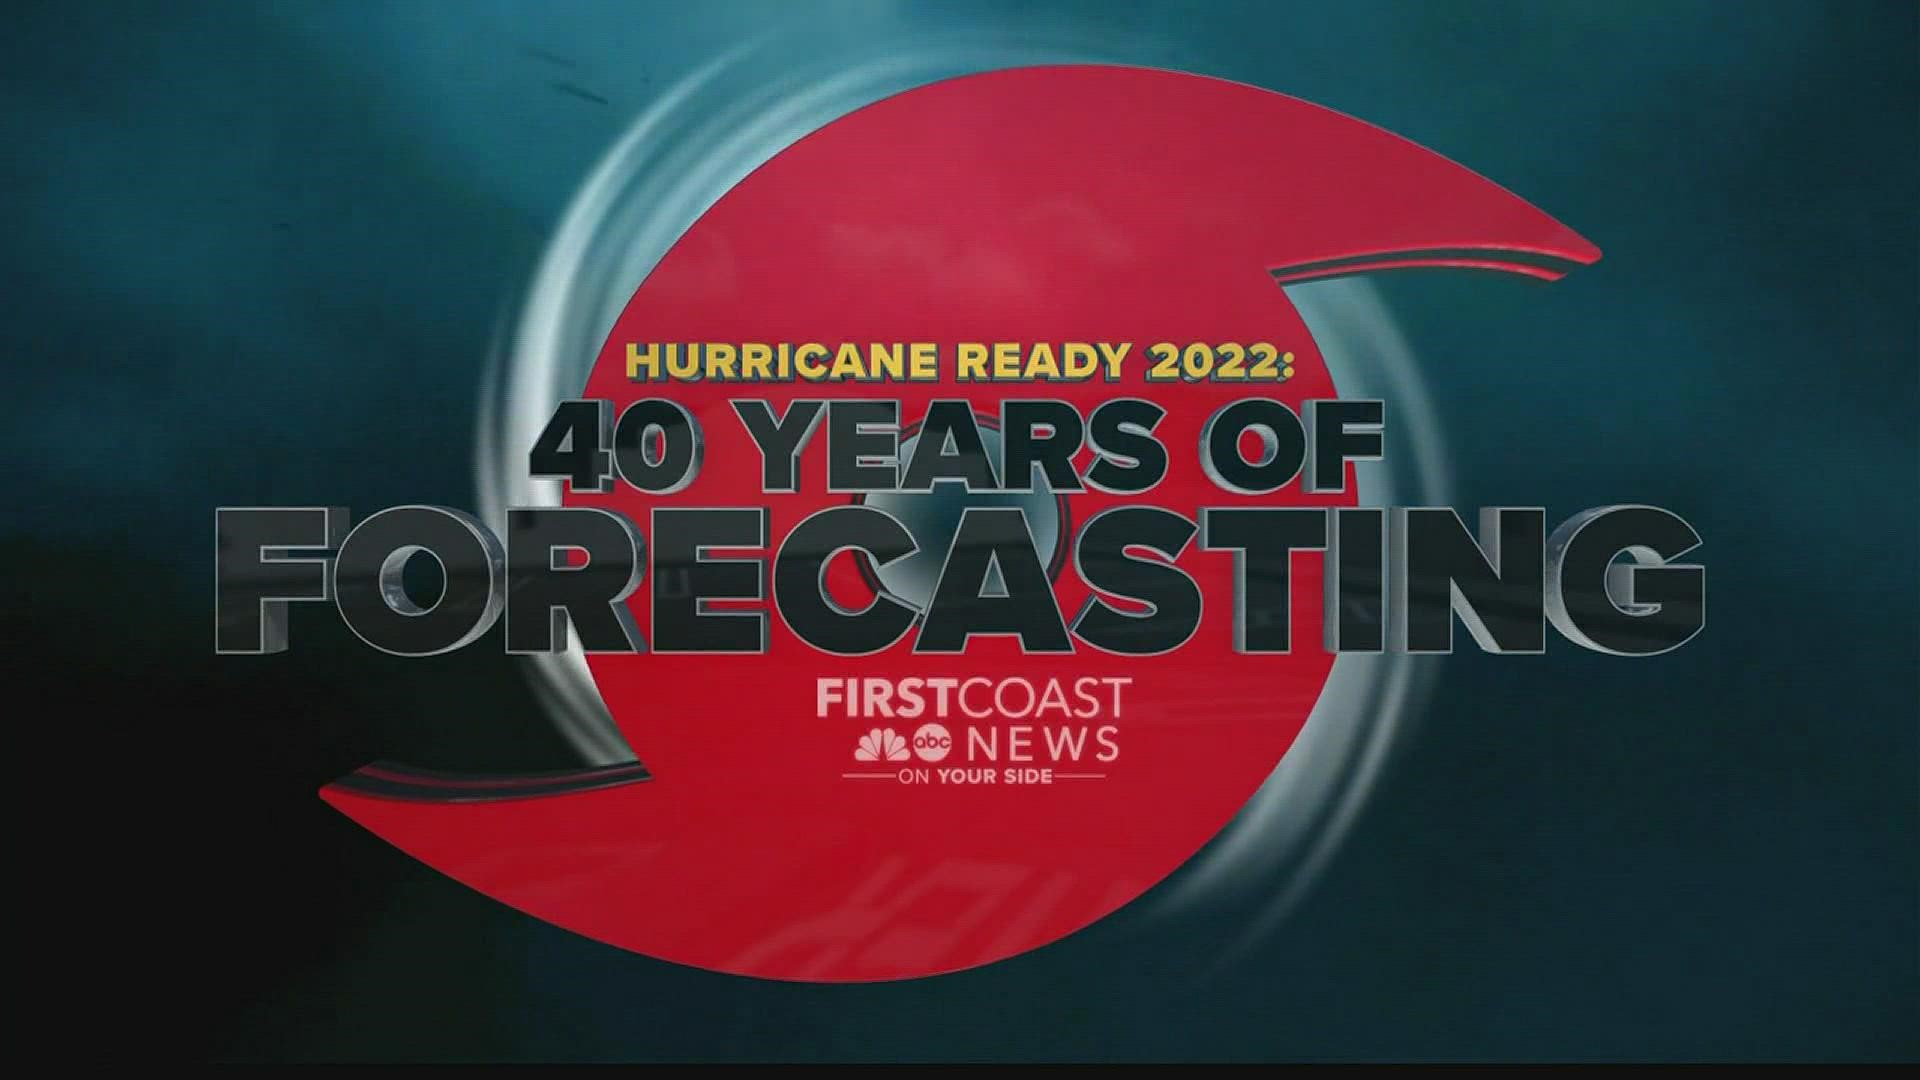 Predicting and forecasting hurricanes is nothing new for First Coast News' Chief Meteorologist Tim Deegan. He's been doing it for over 40 years and he's the best.